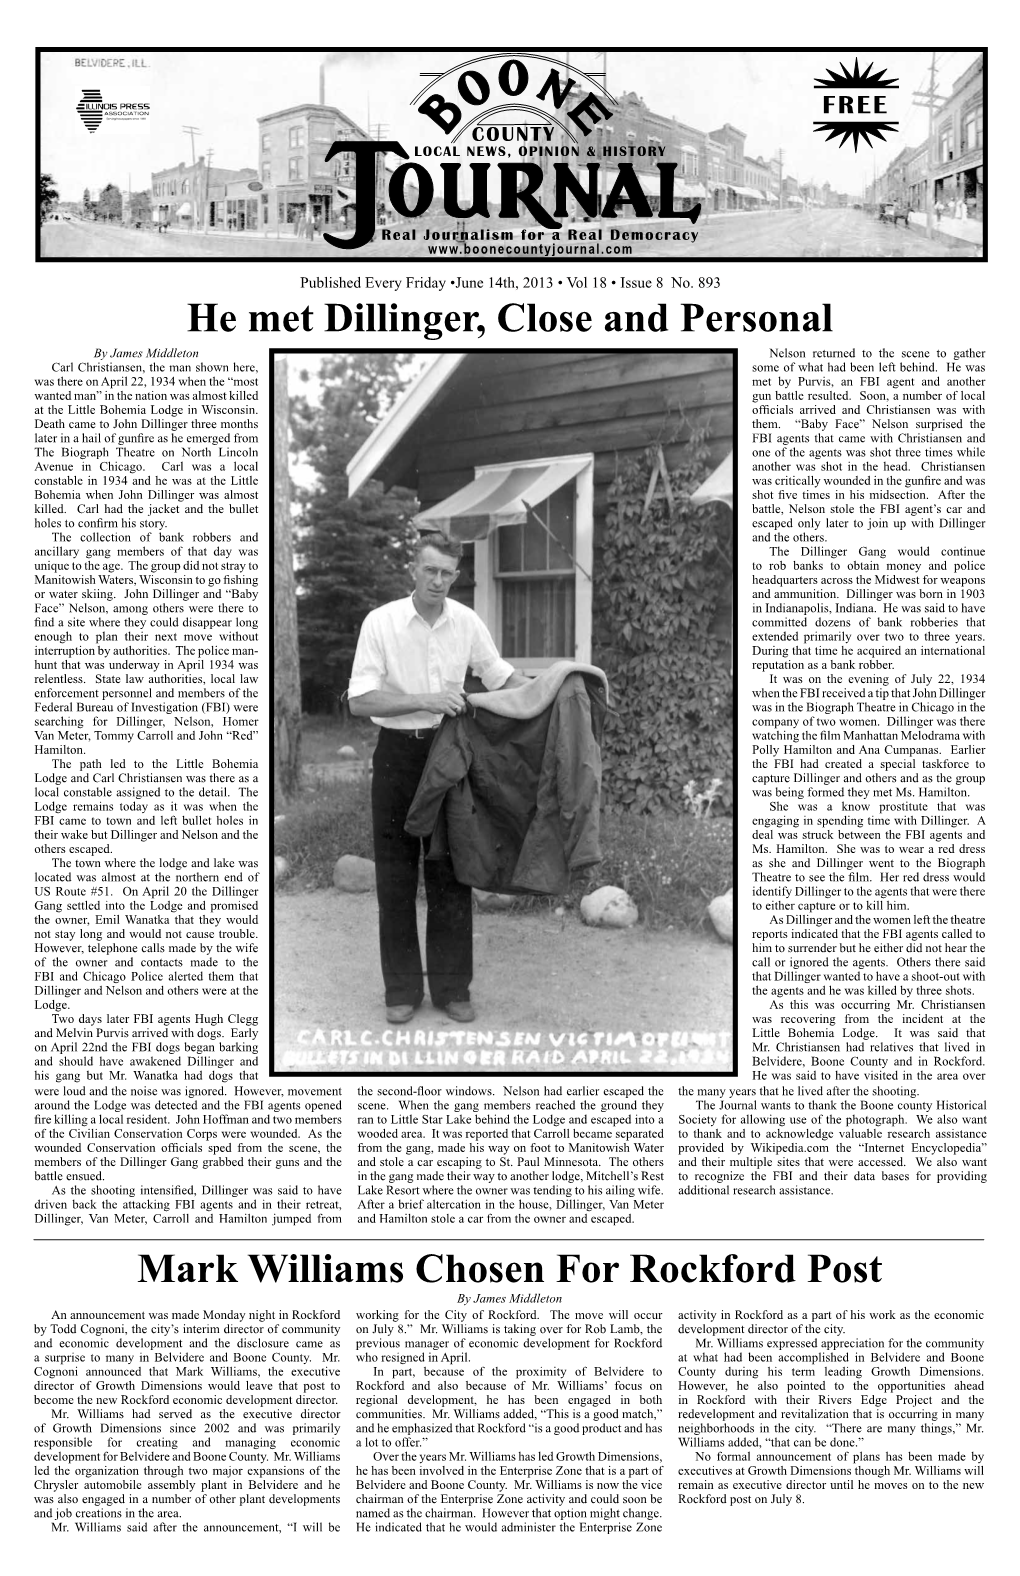 He Met Dillinger, Close and Personal Mark Williams Chosen for Rockford